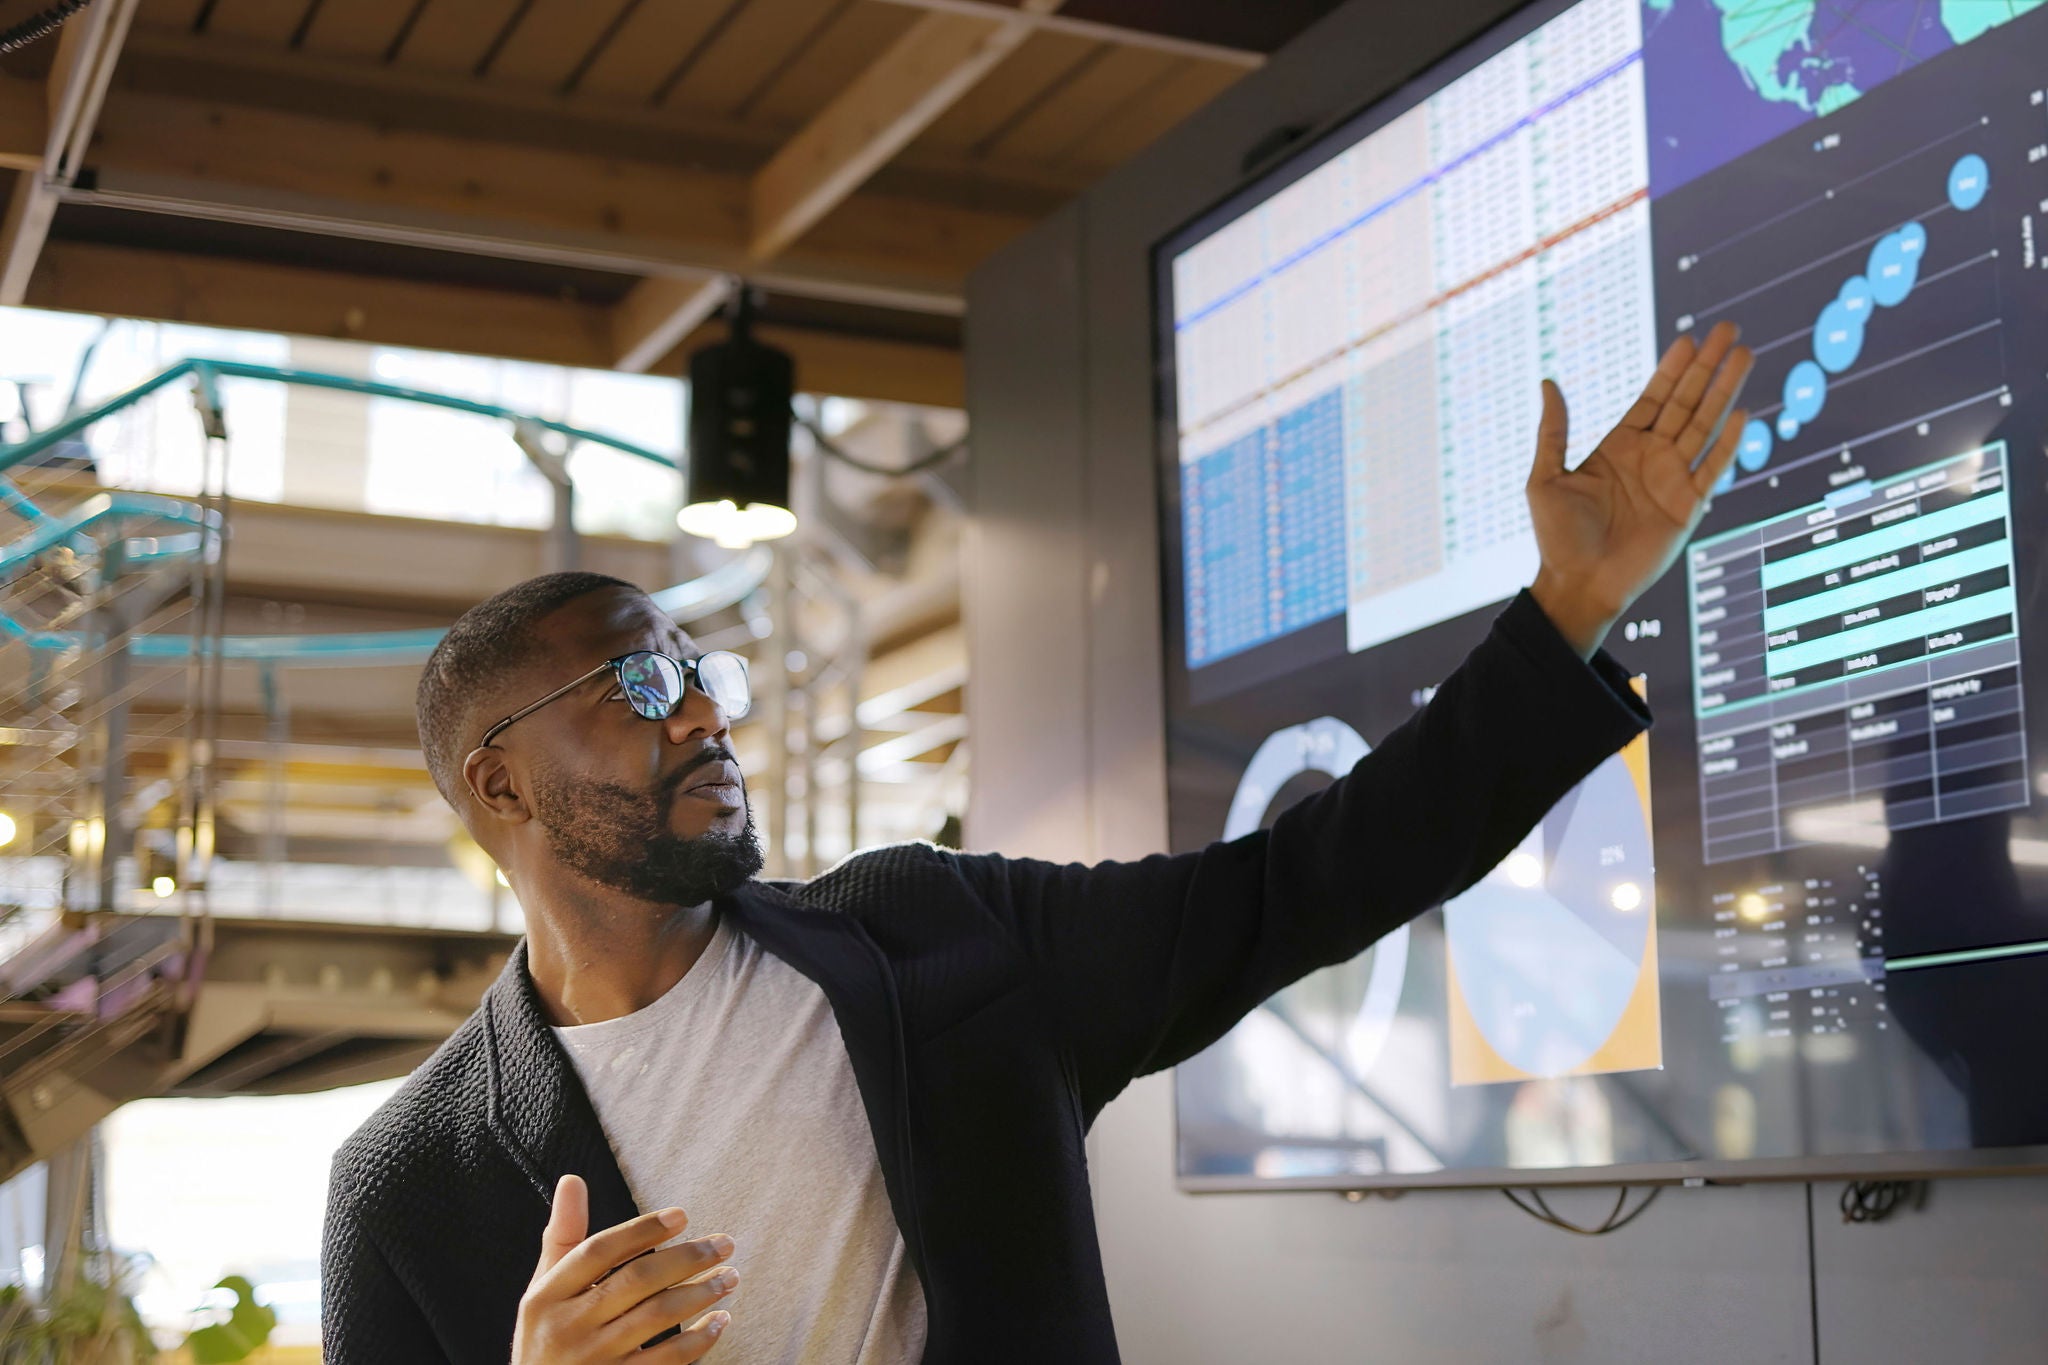 Stock image of a Black man conducting a seminar / lecture with the aid of a large screen. The screen is displaying graphs & data associated with movie clips of the earth.